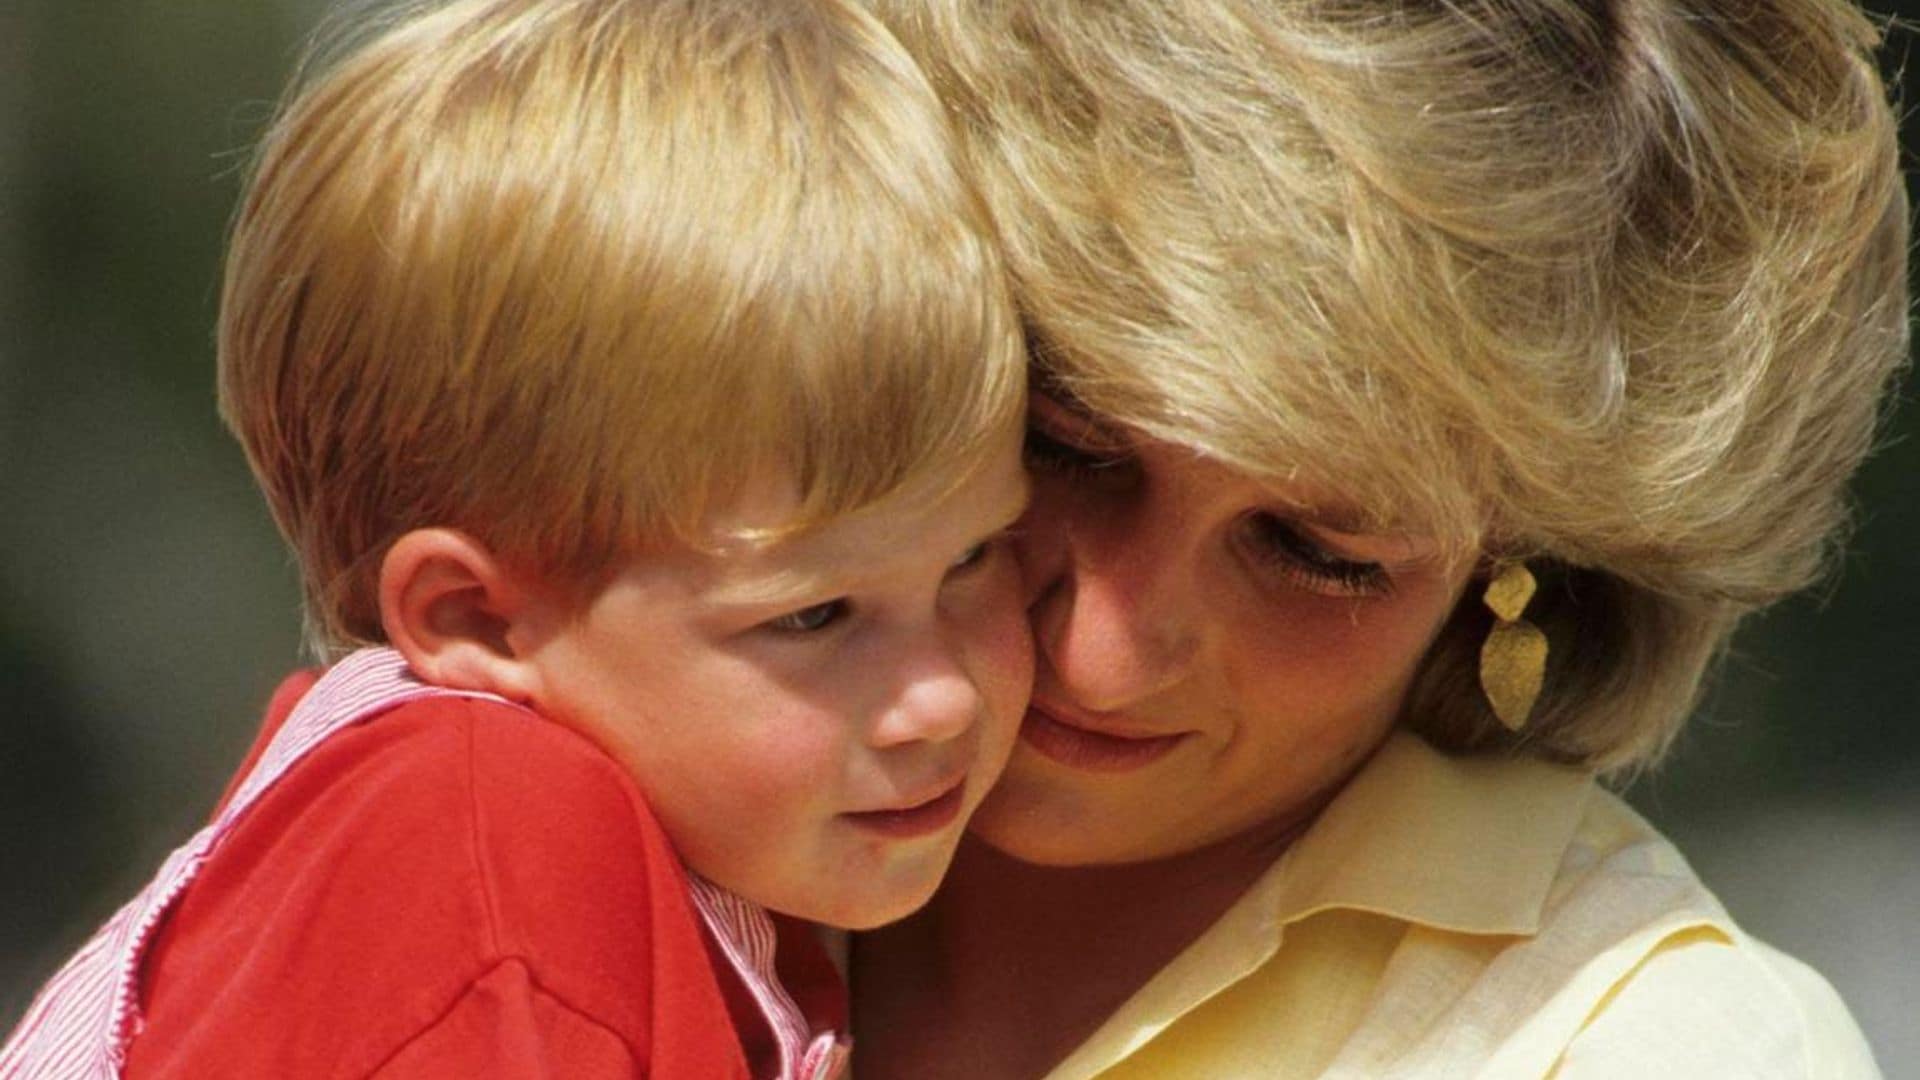 Prince Harry opened up about Princess Diana's death in ITV documentary